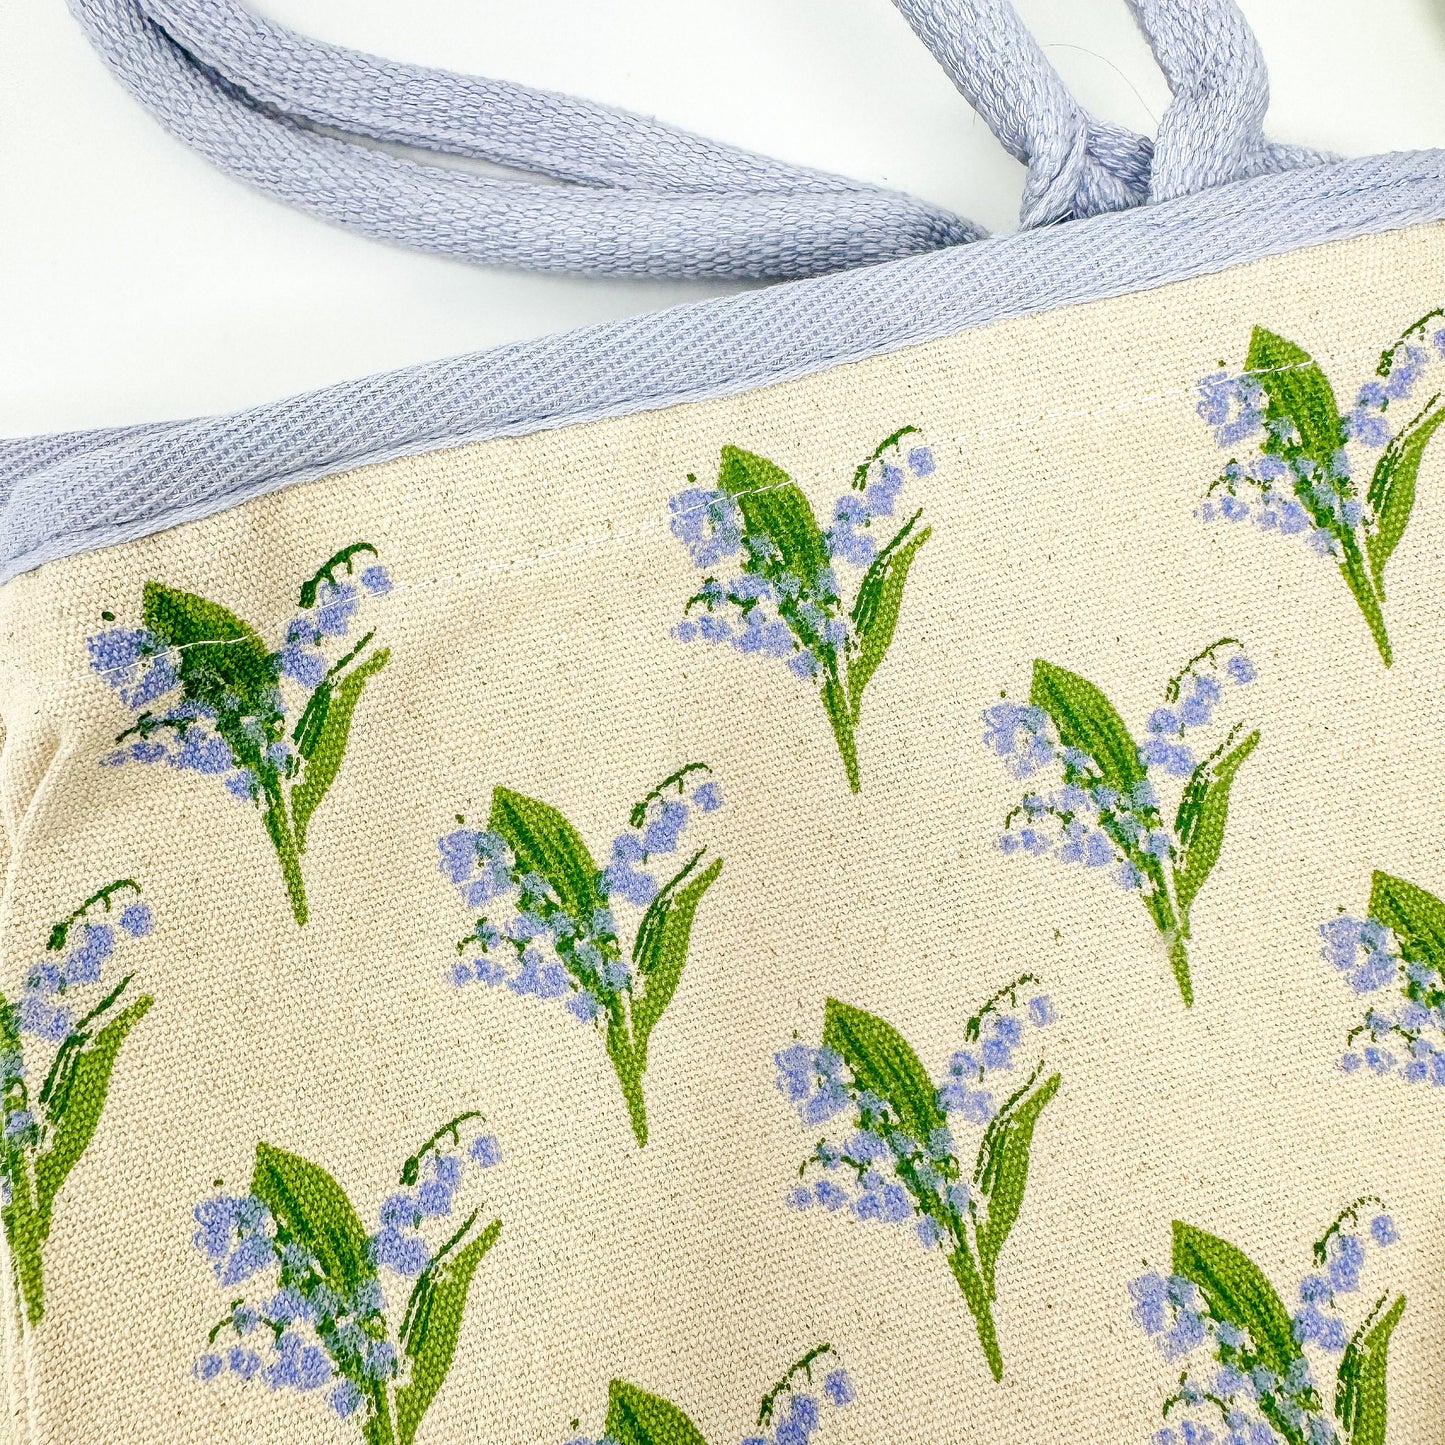 Lily of the Valley Painted Cotton Tote Bag